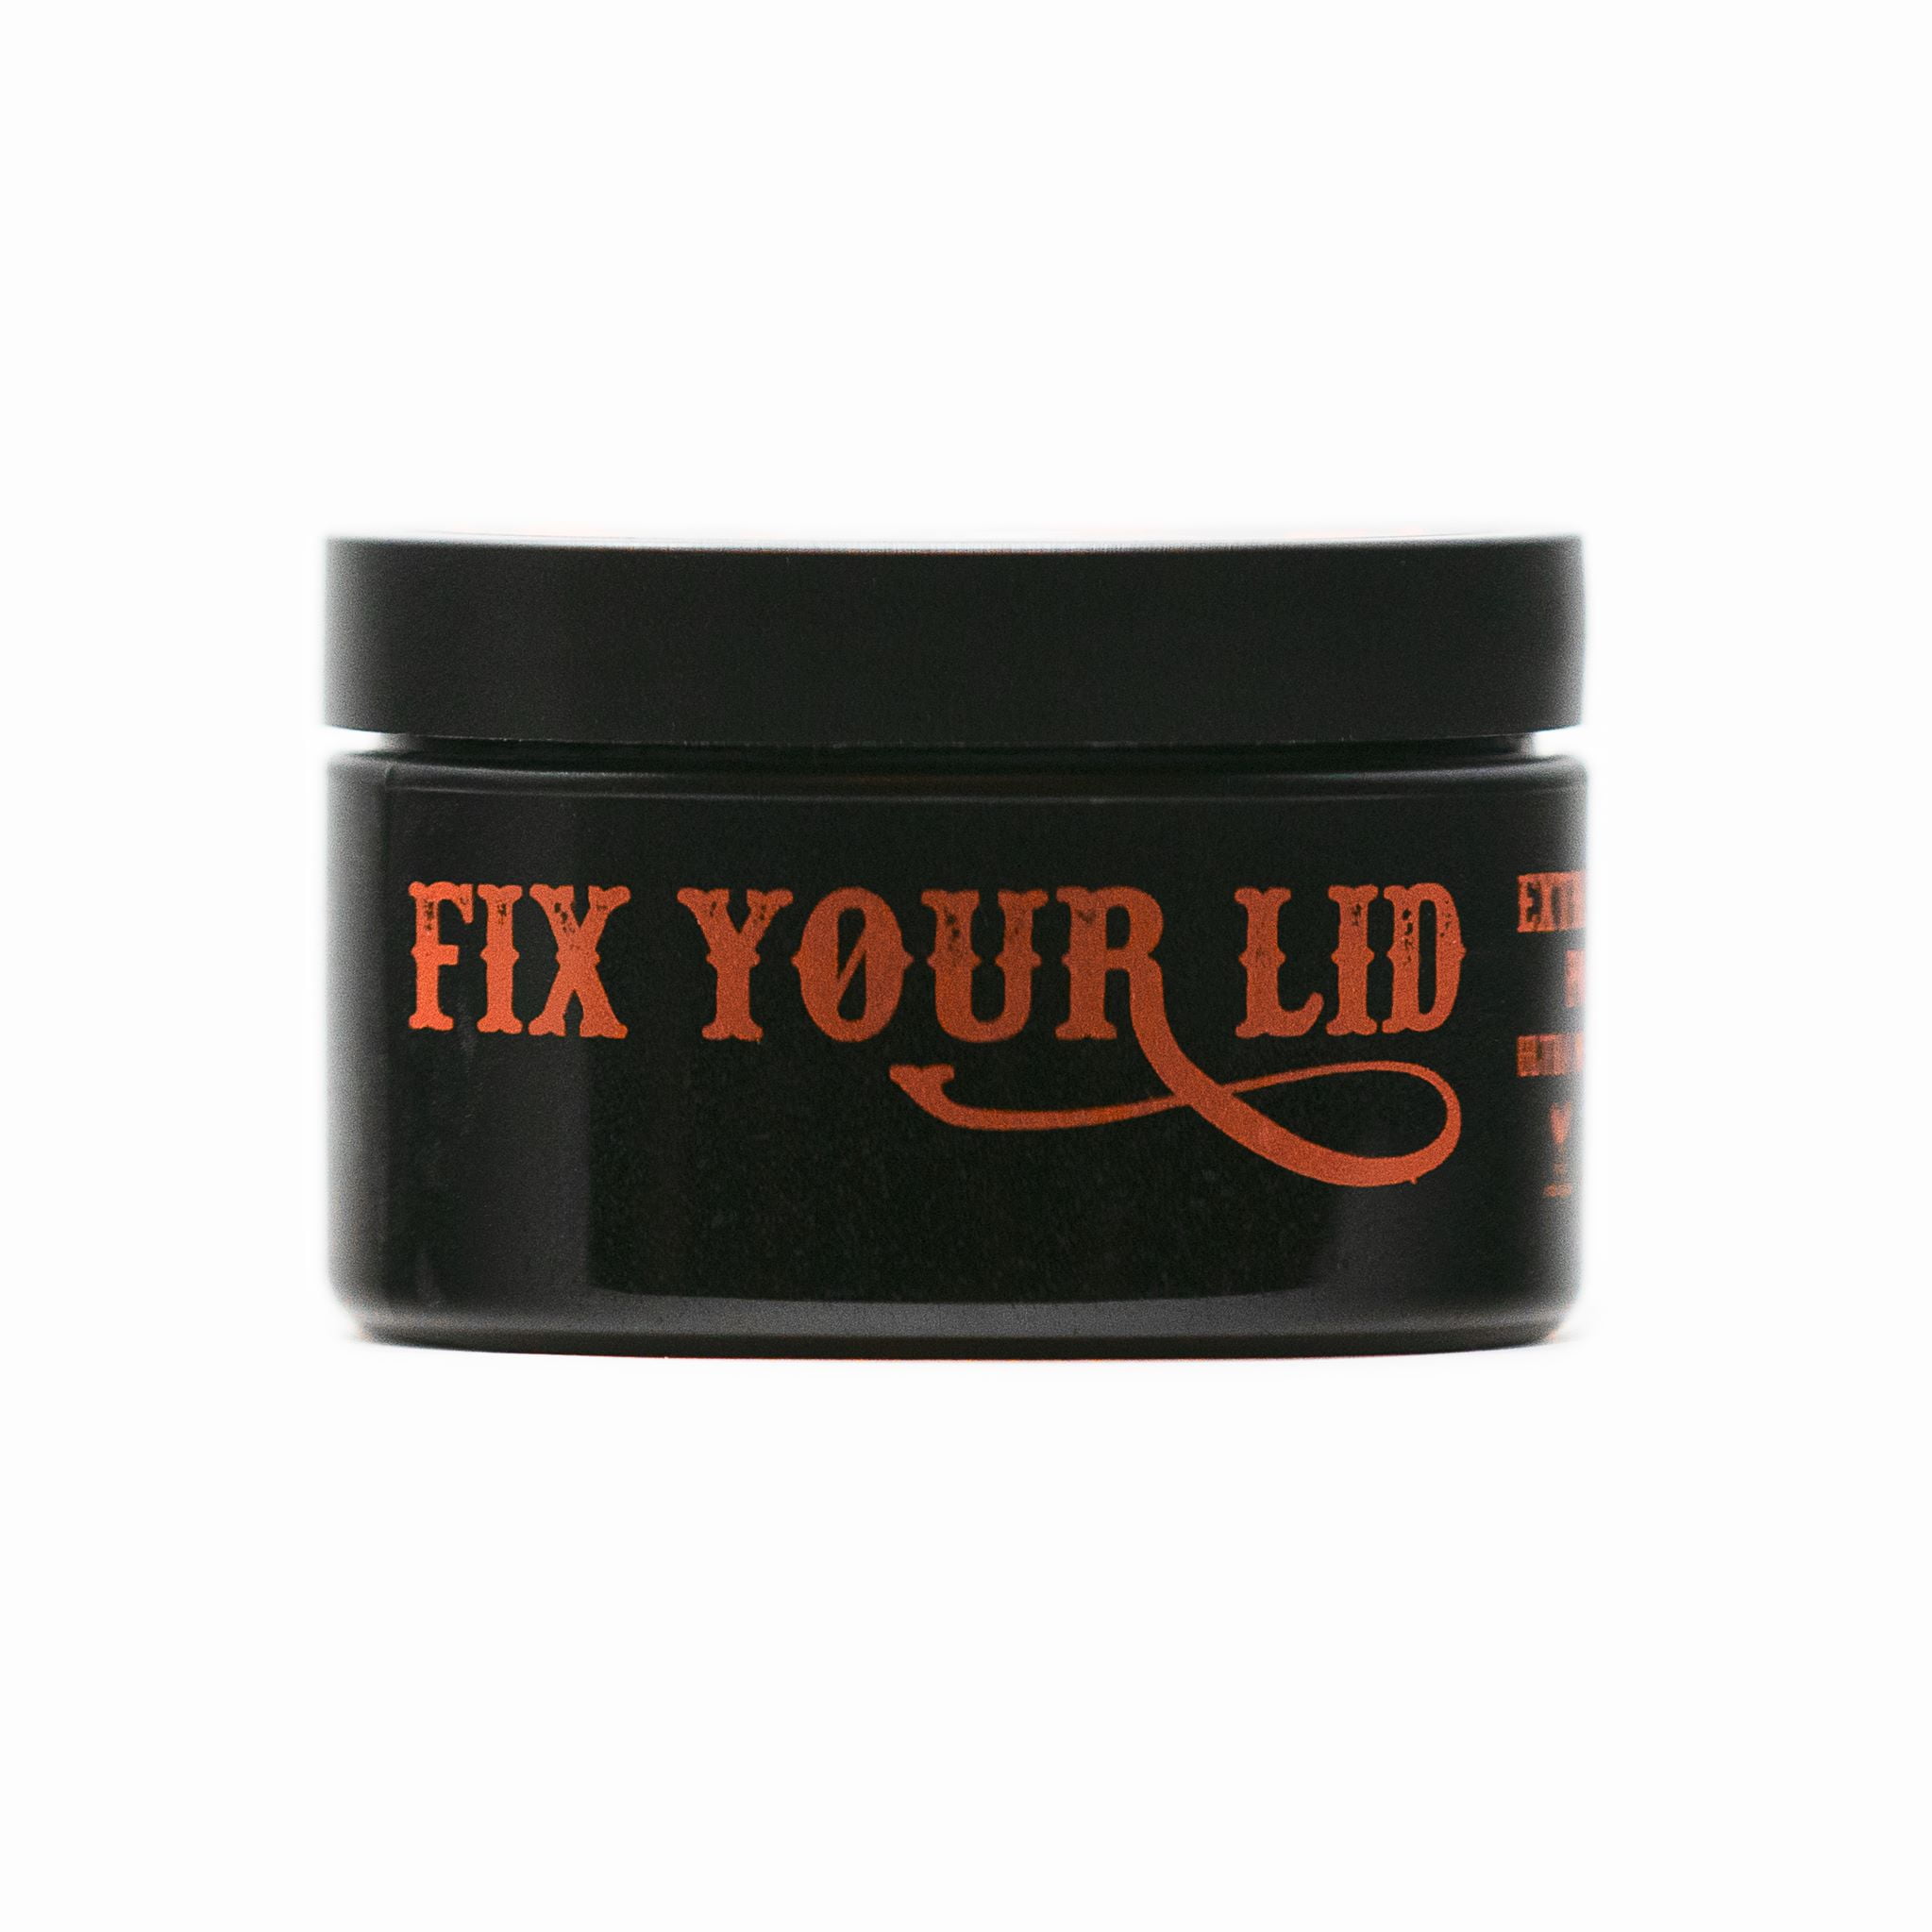 Fix Your Lid Extreme Hold Pomade, Ultra Hold High Shine Styling Hair pomade  for Men, 3.75 Oz 